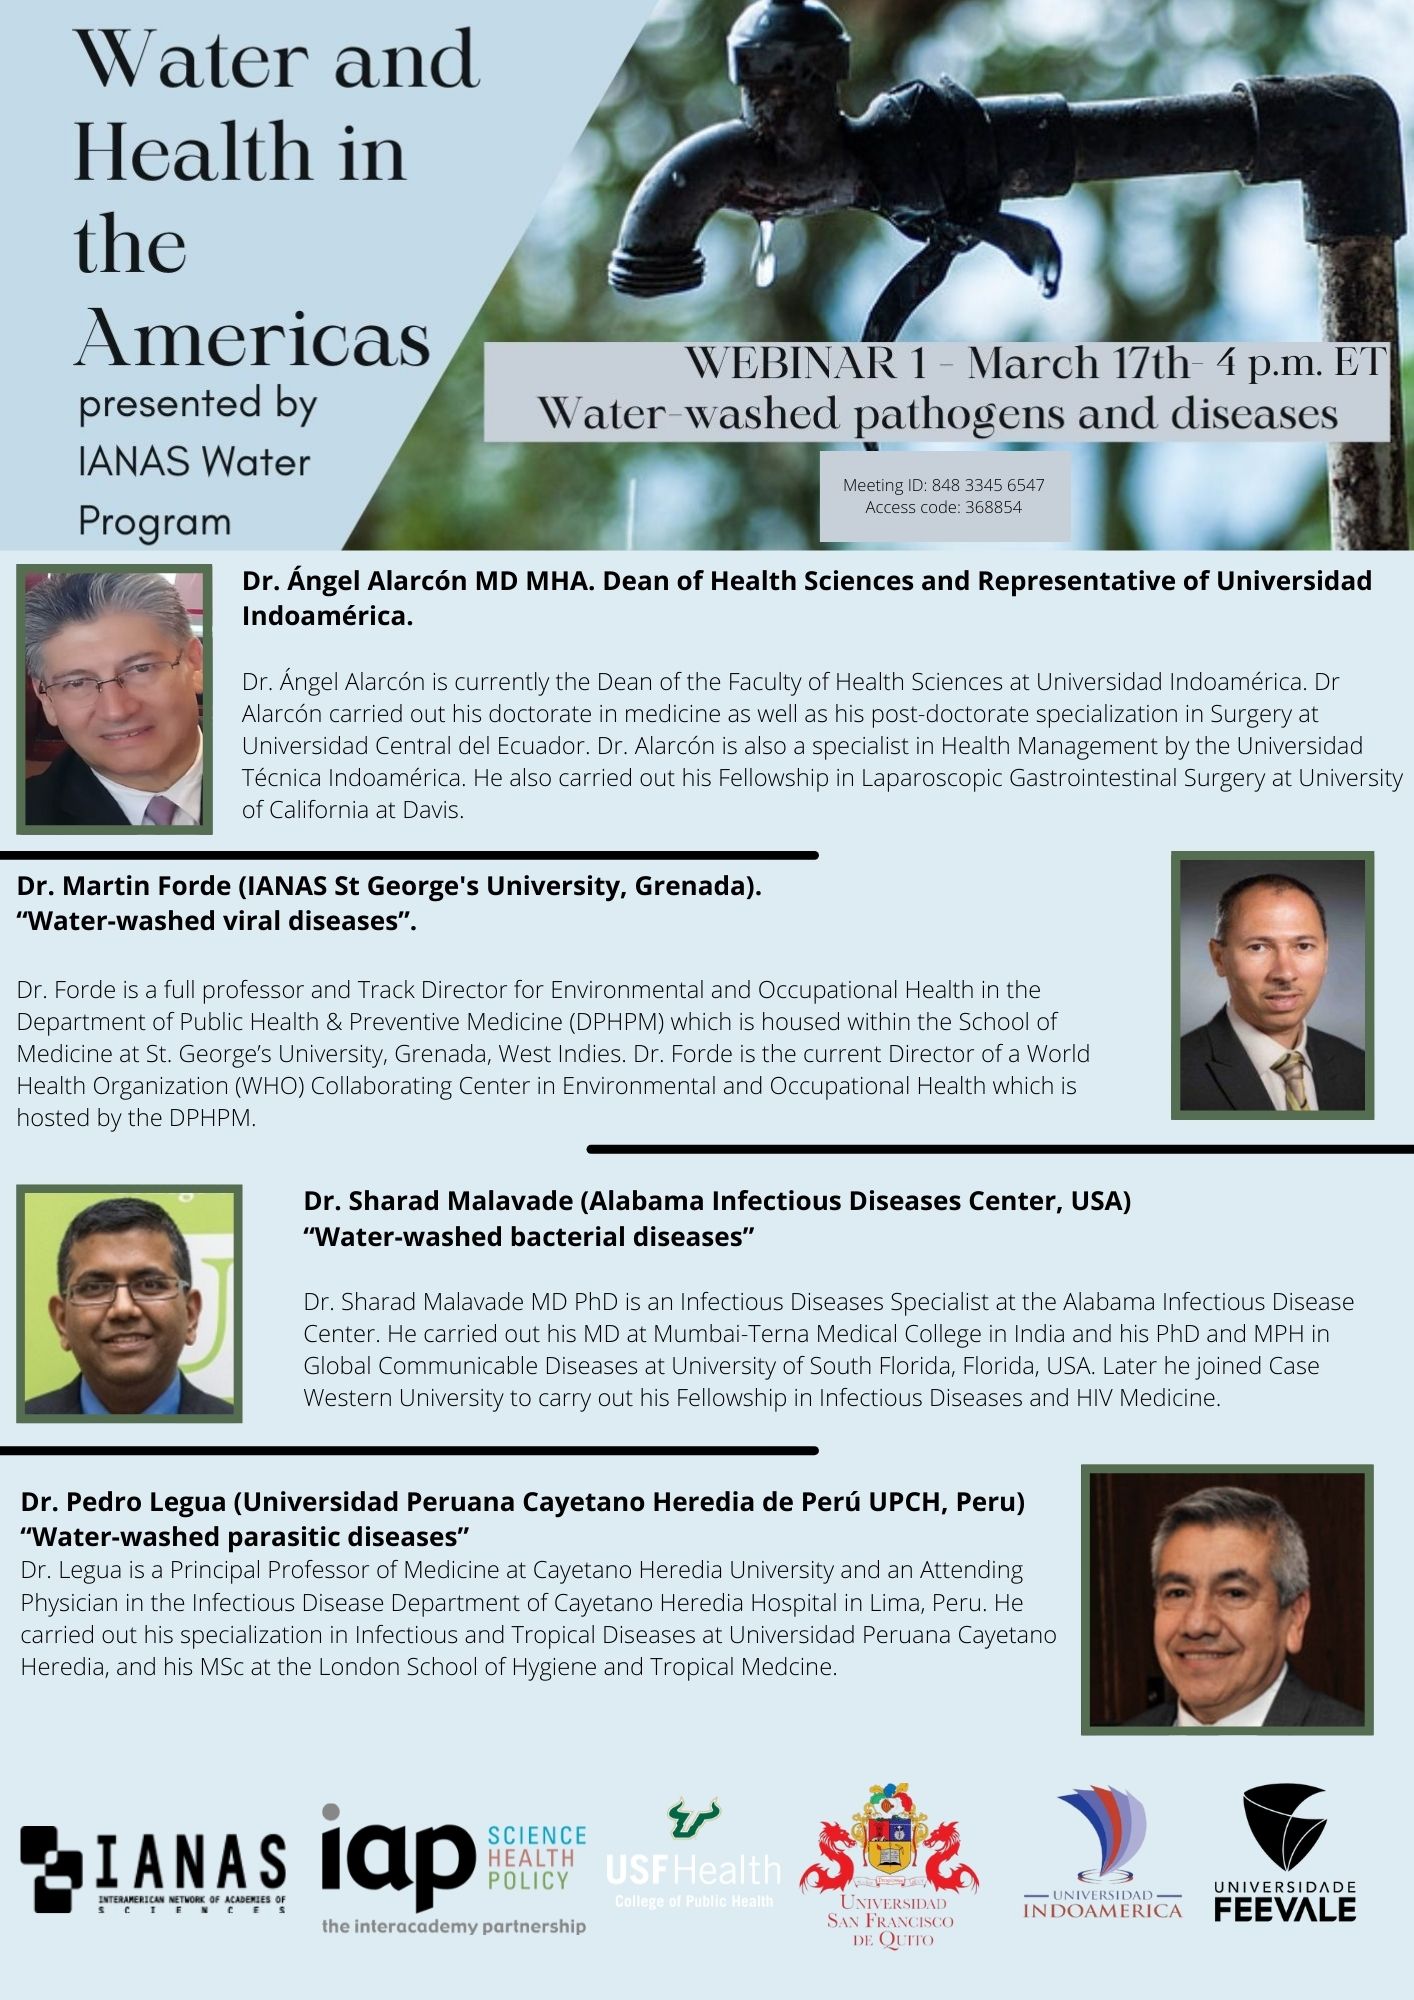 Water and Health in the Americas 17 March